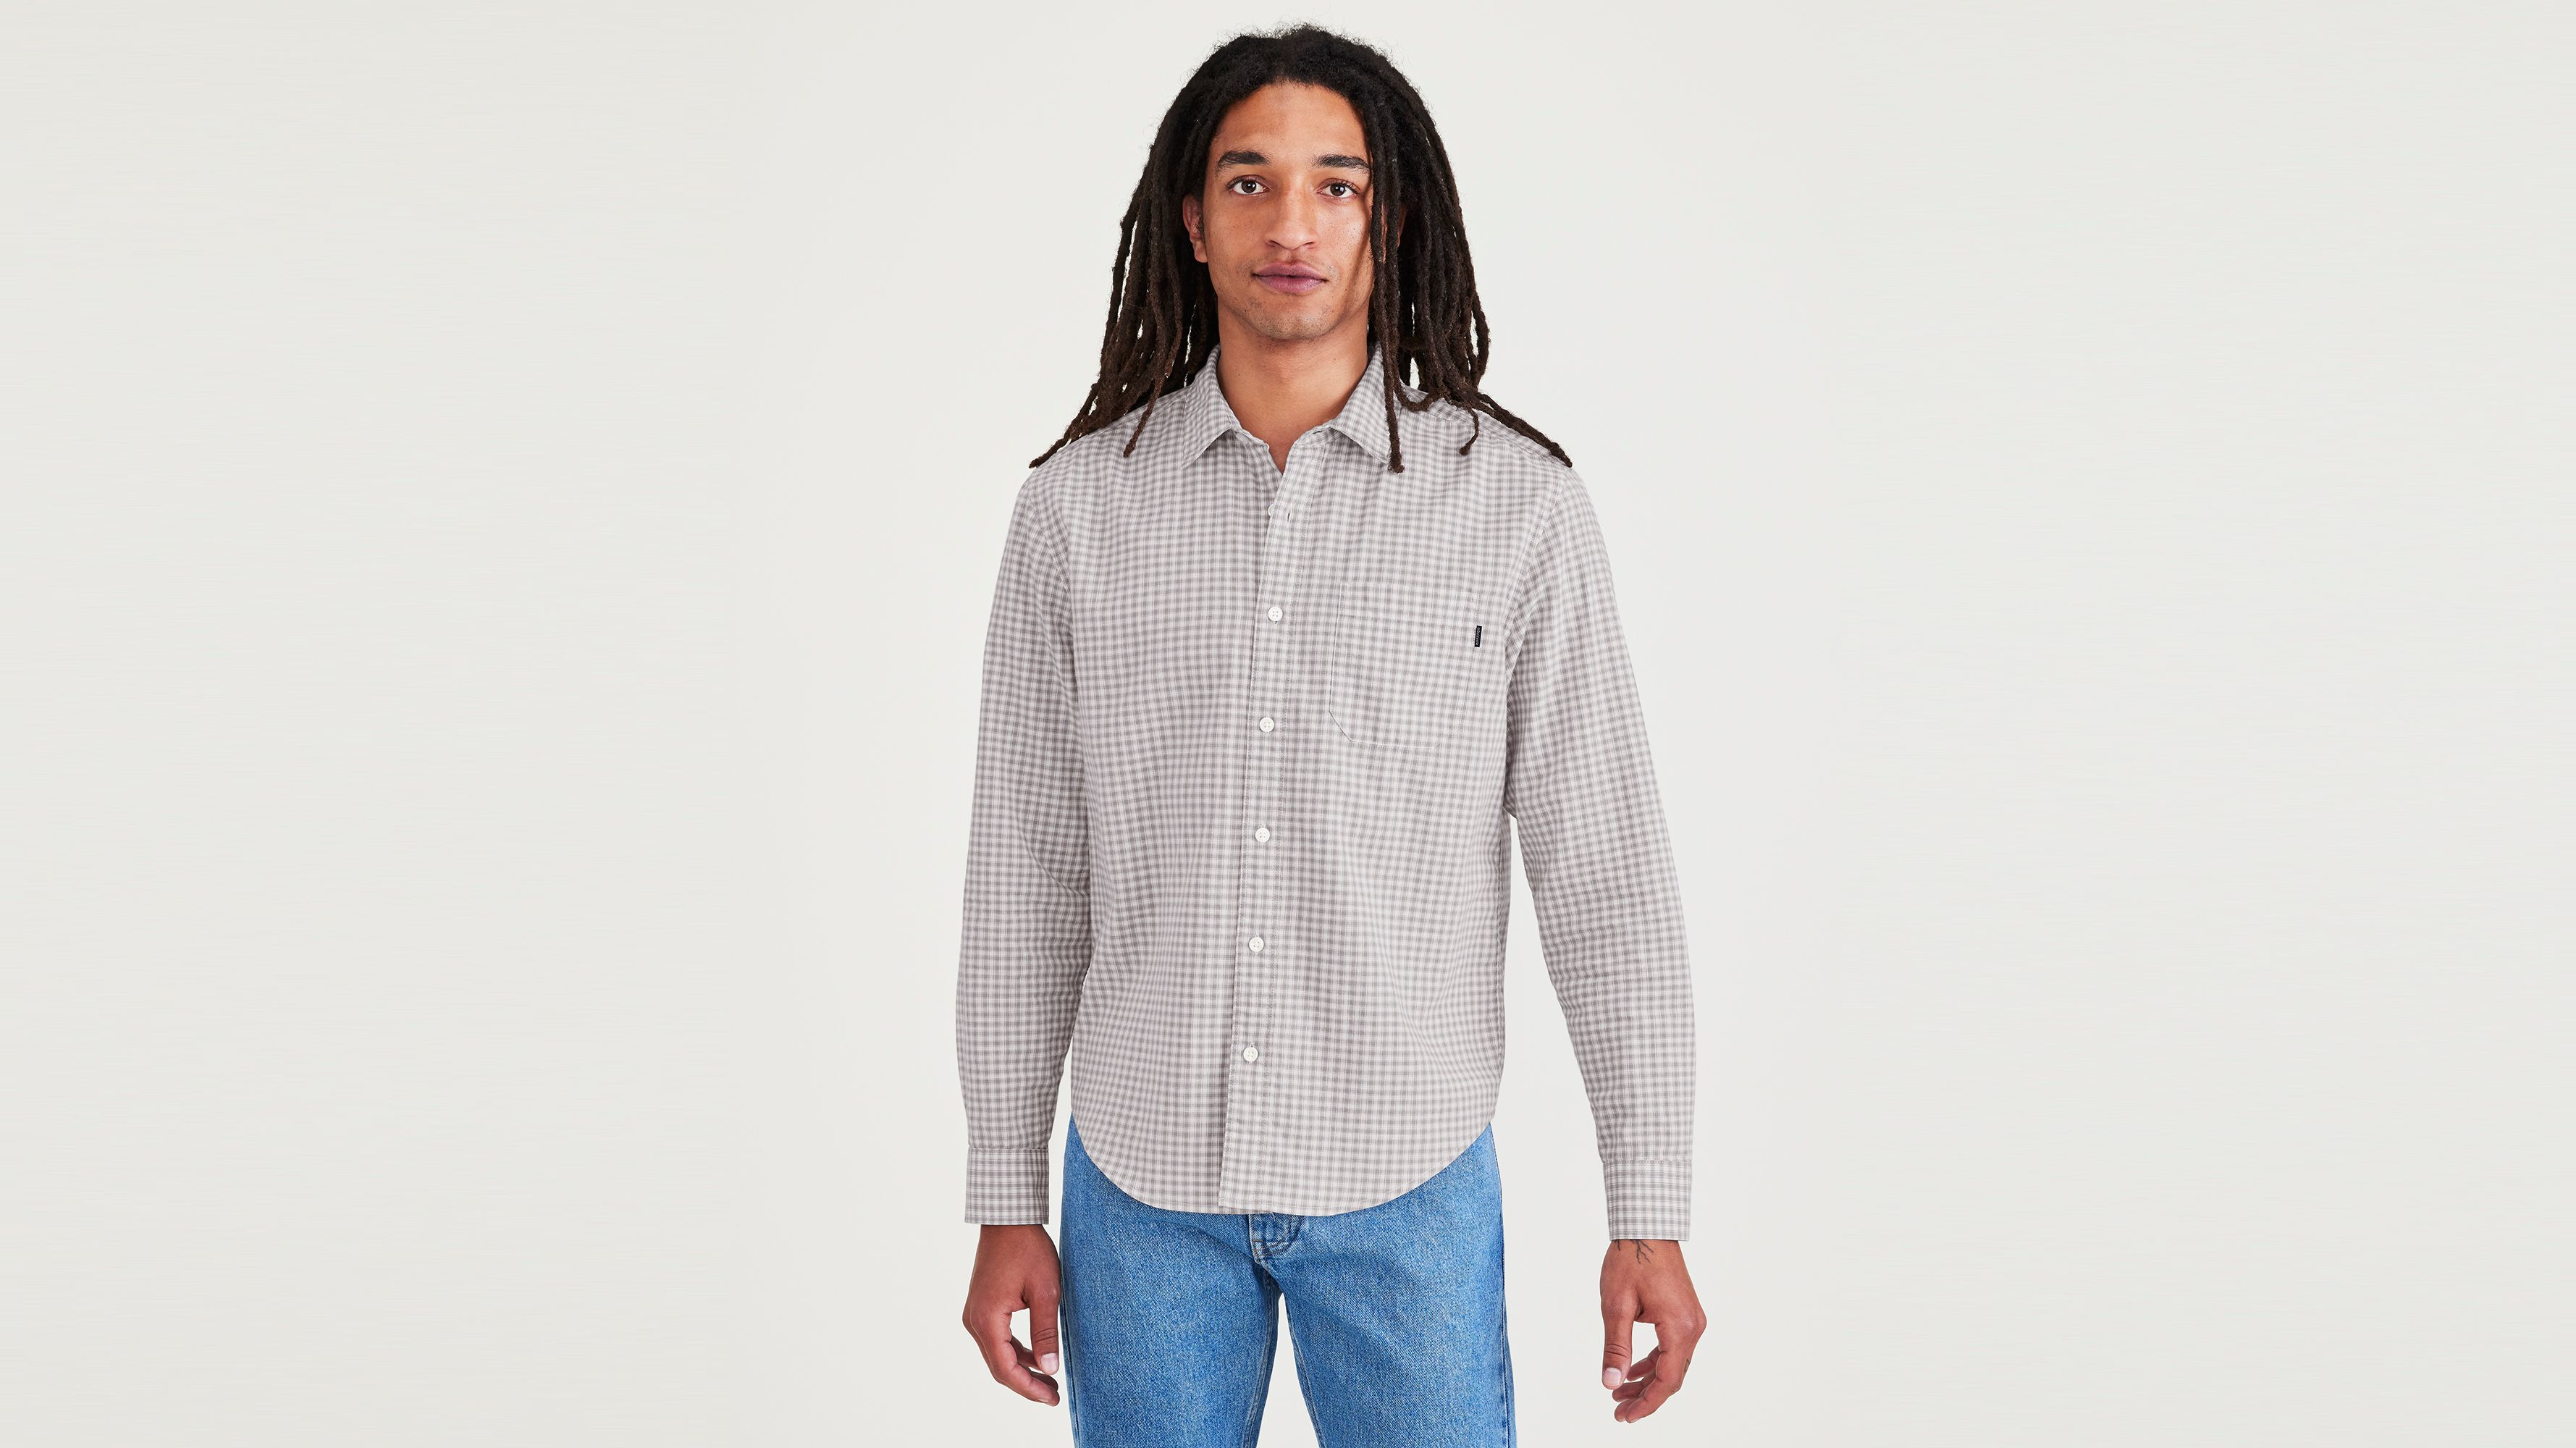 St. John's Bay Chambray Mens Slim Fit Long Sleeve Button-Down Shirt -  JCPenney